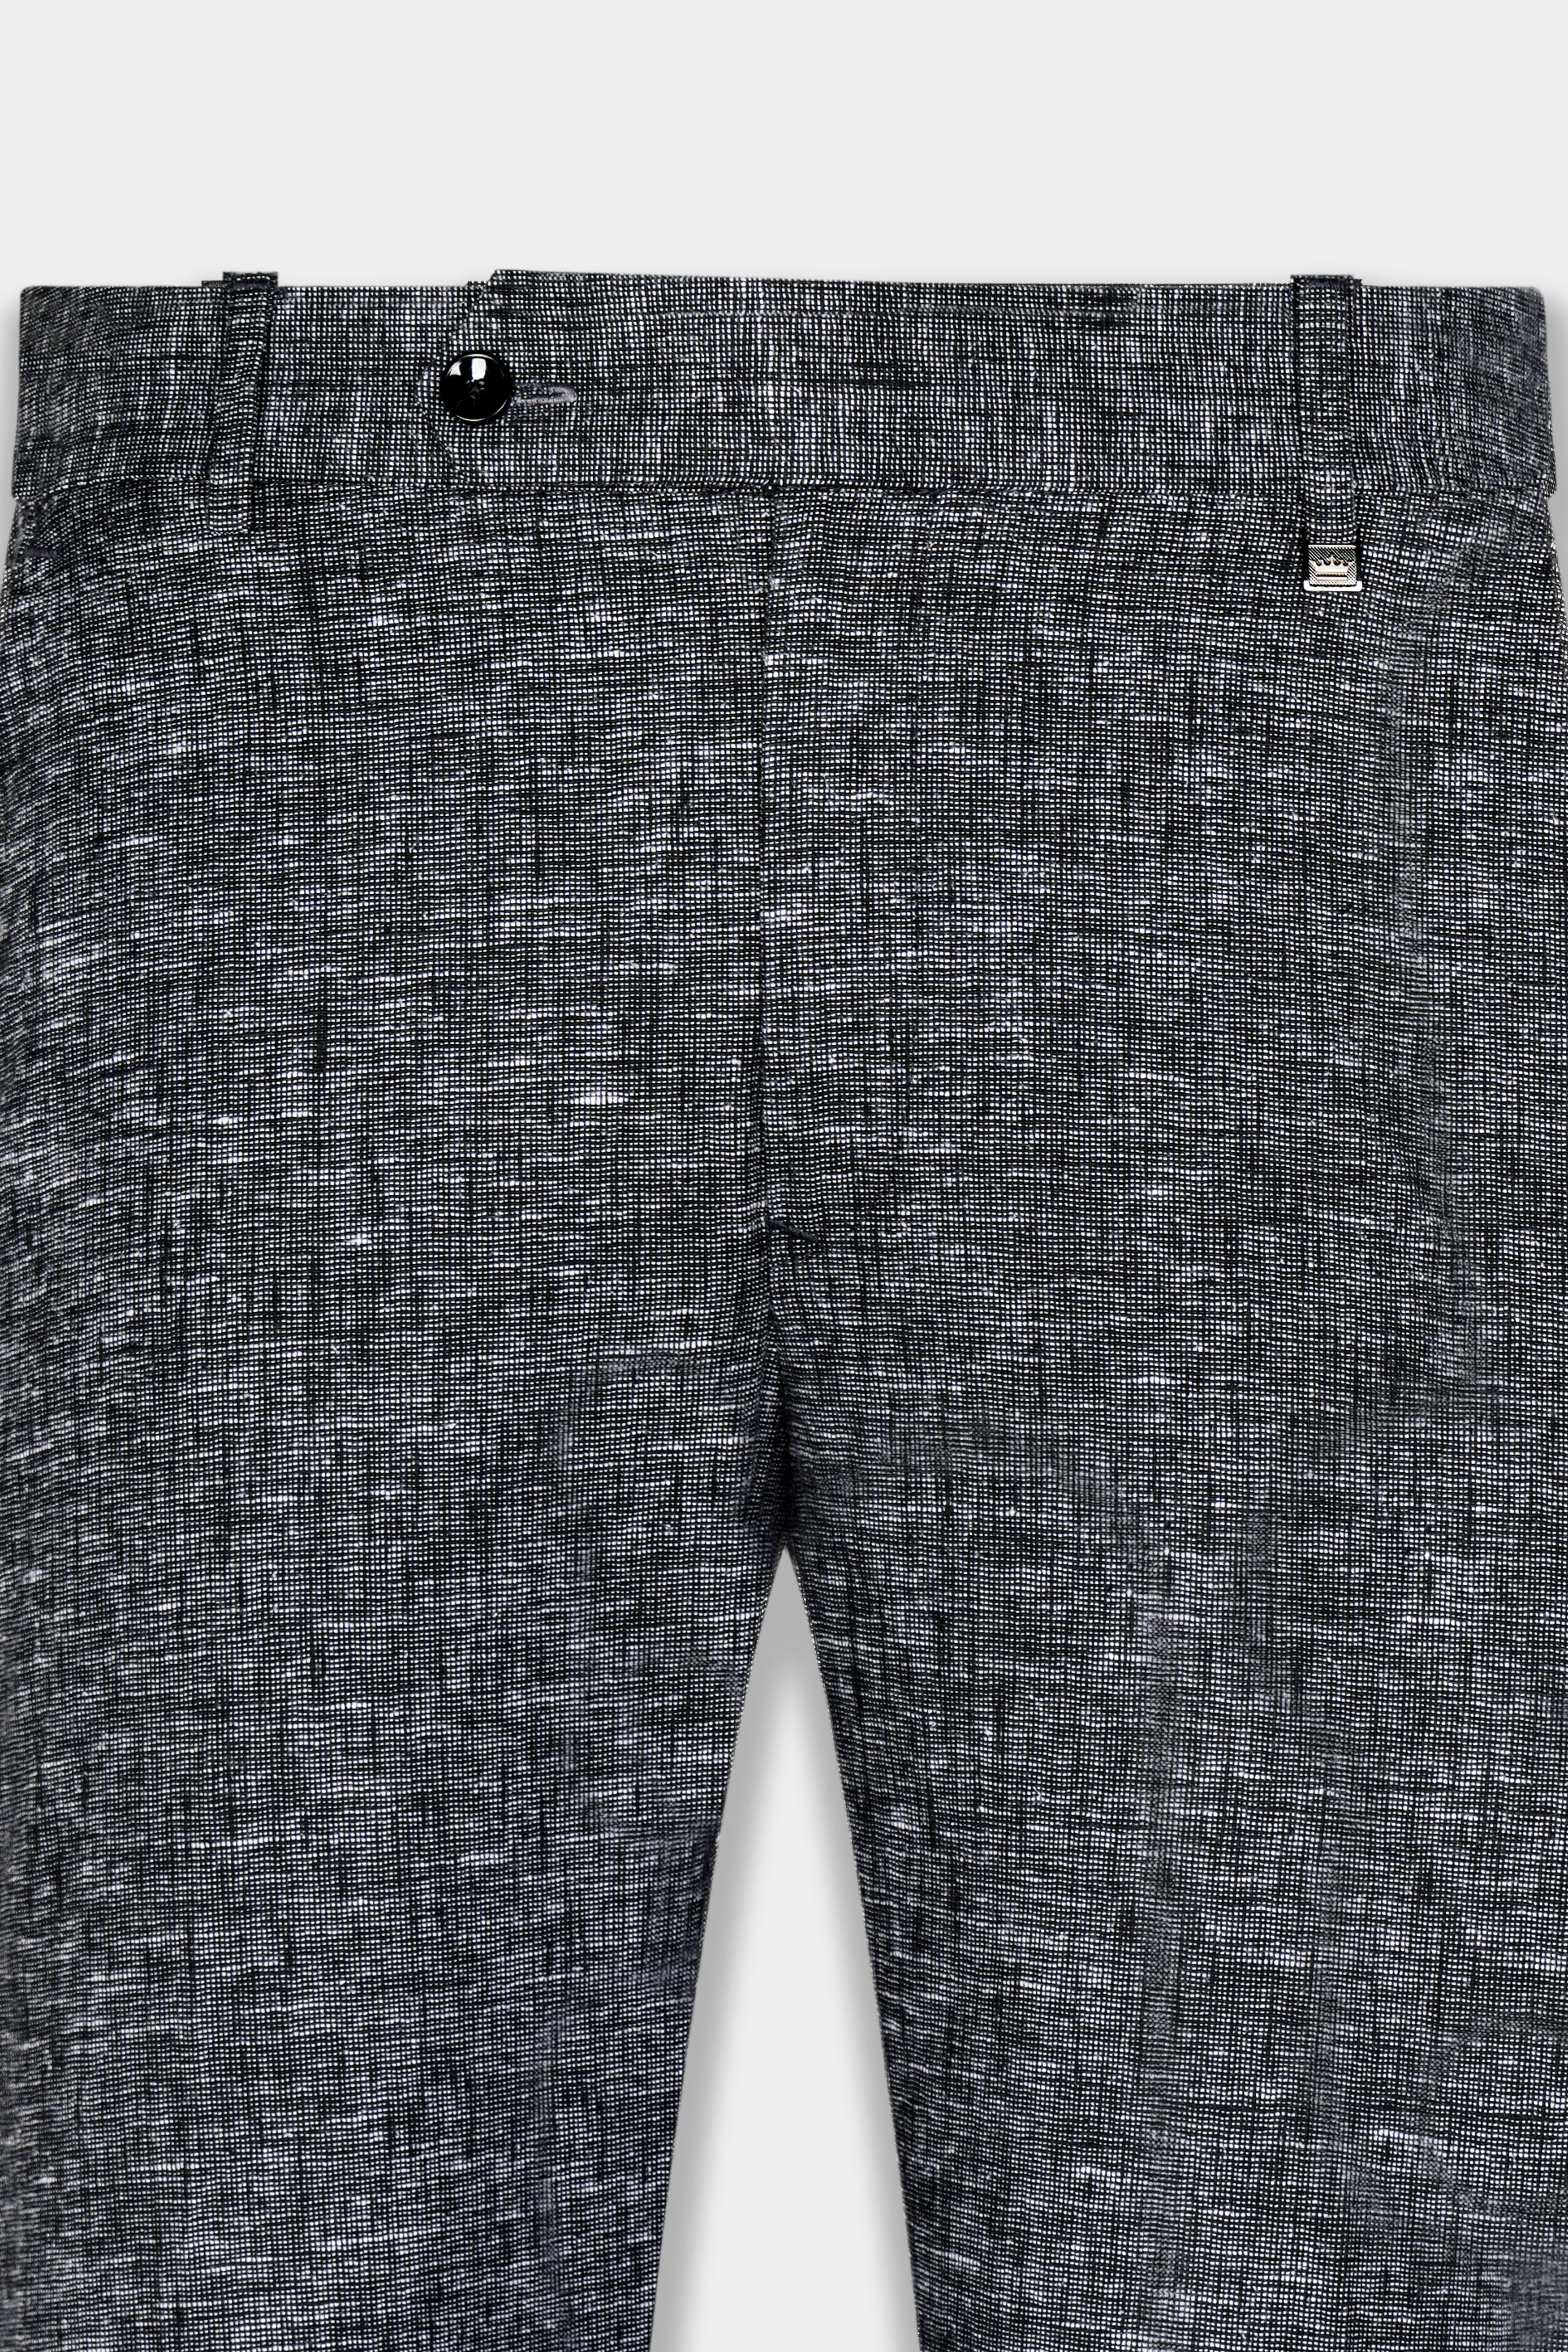 Arsenic Gray Luxurious Linen Single Breasted Suit ST2922-SB-36,ST2922-SB-38,ST2922-SB-40,ST2922-SB-42,ST2922-SB-44,ST2922-SB-46,ST2922-SB-48,ST2922-SB-50,ST2922-SB-52,ST2922-SB-54,ST2922-SB-56,ST2922-SB-58,ST2922-SB-60